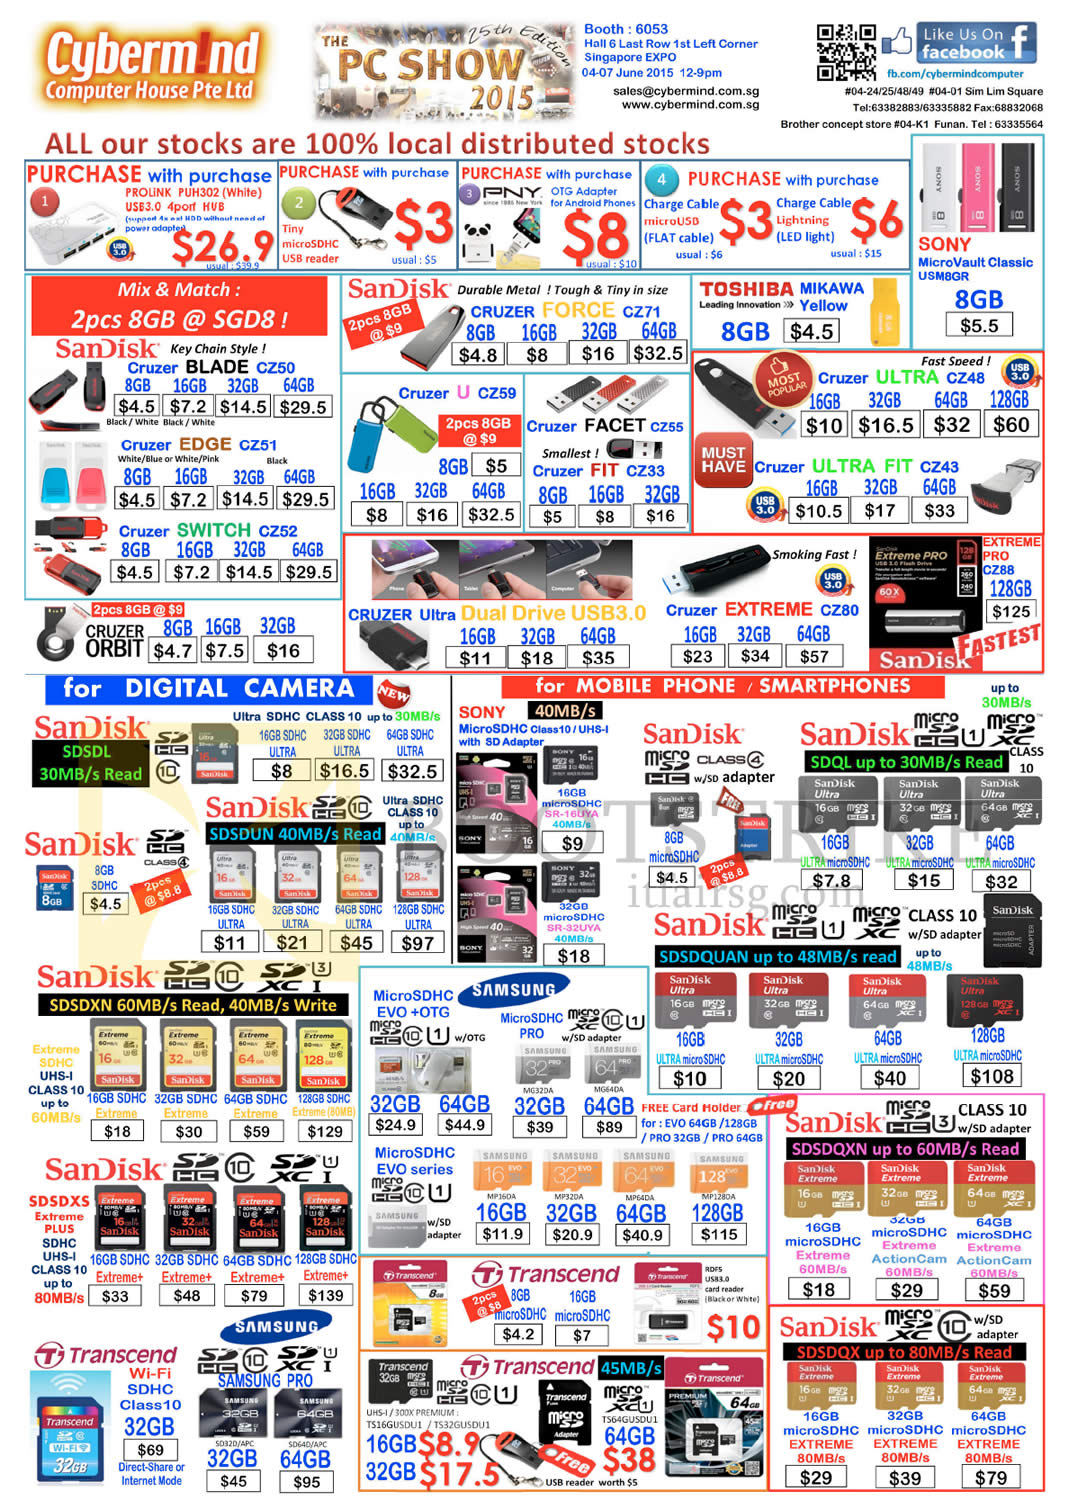 PC SHOW 2015 price list image brochure of Cybermind Memory Cards, Flash Drives, Cruzer Blade, Edge, Switch, Facet, Toshiba Mikawa, Sandisk, MicroSDHC, Transcend, Ultra, Sony